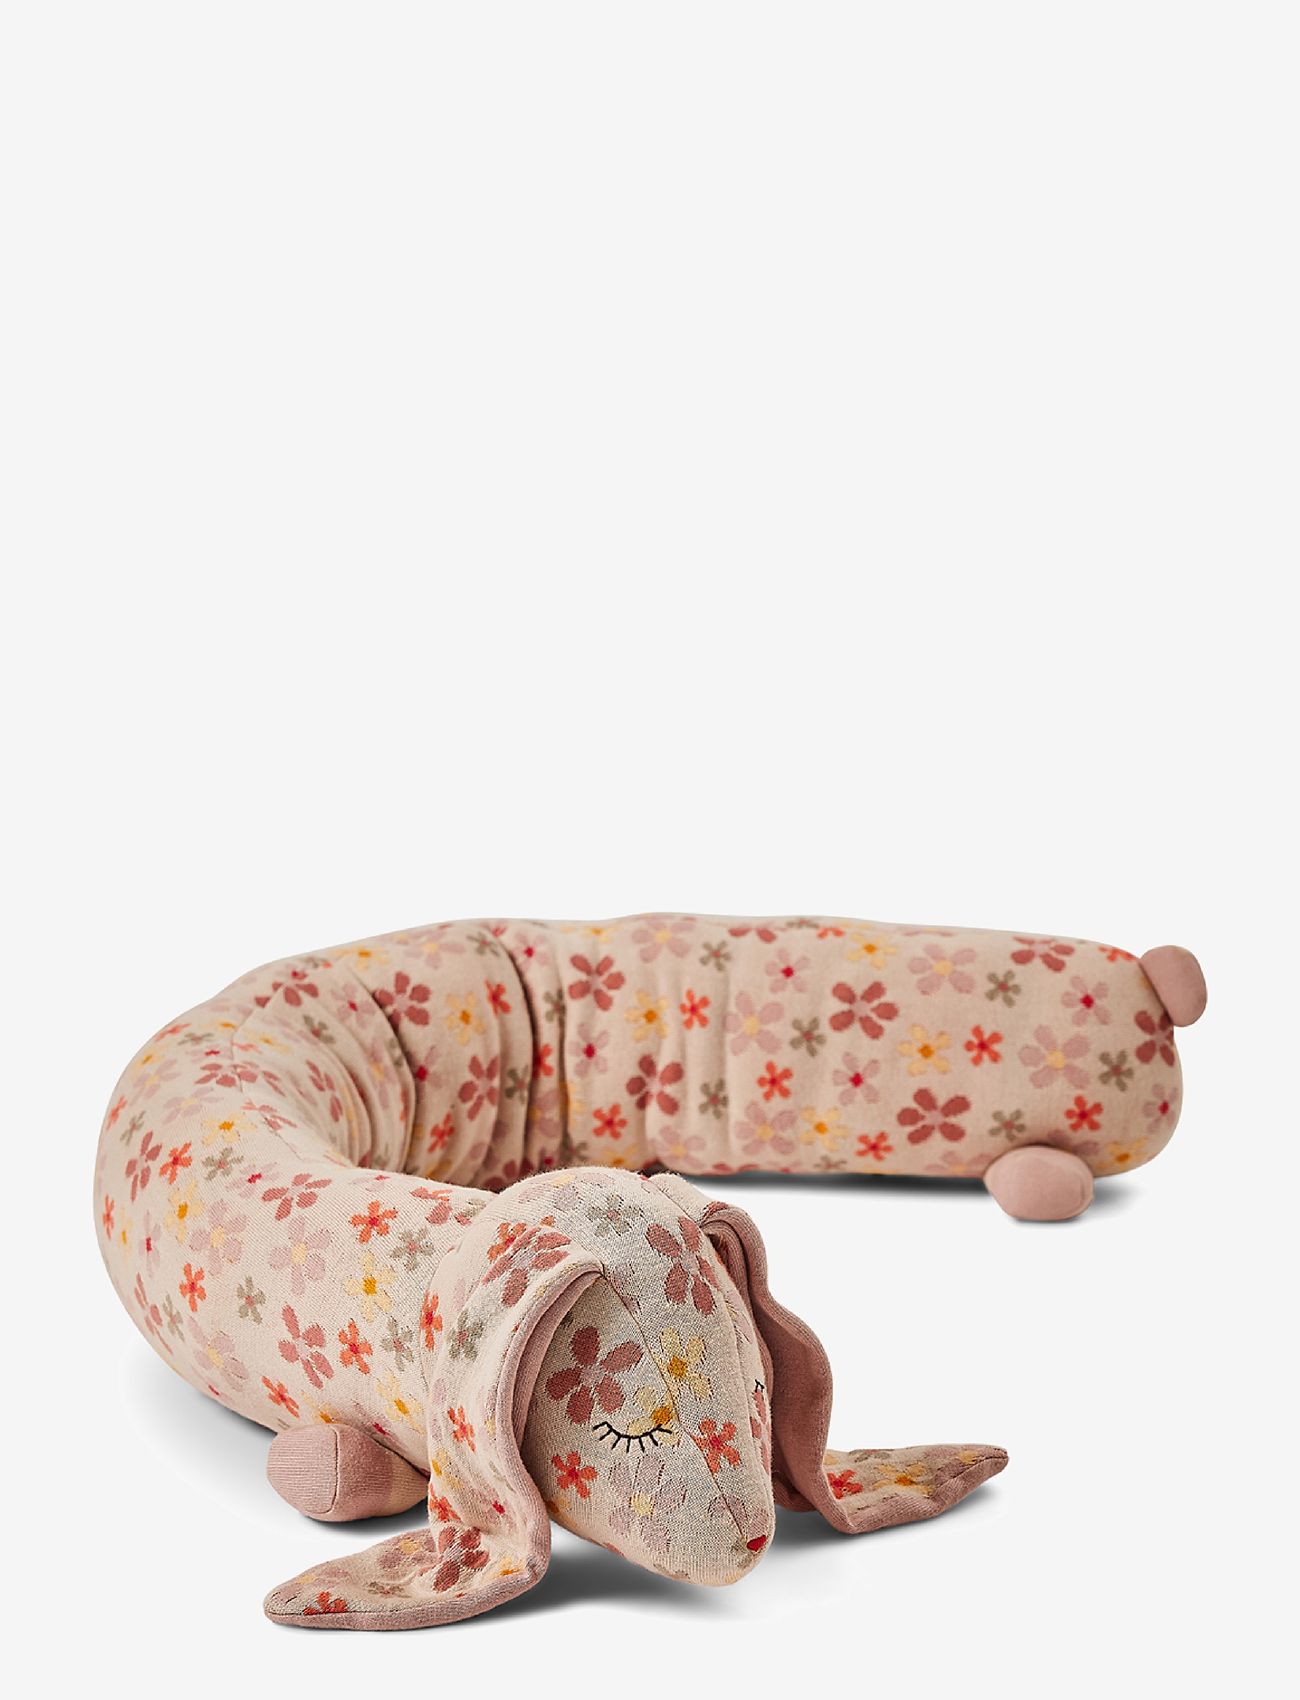 Smallstuff - Bed animal, rabbit with flowers, rose peach - miegam - rose - 0